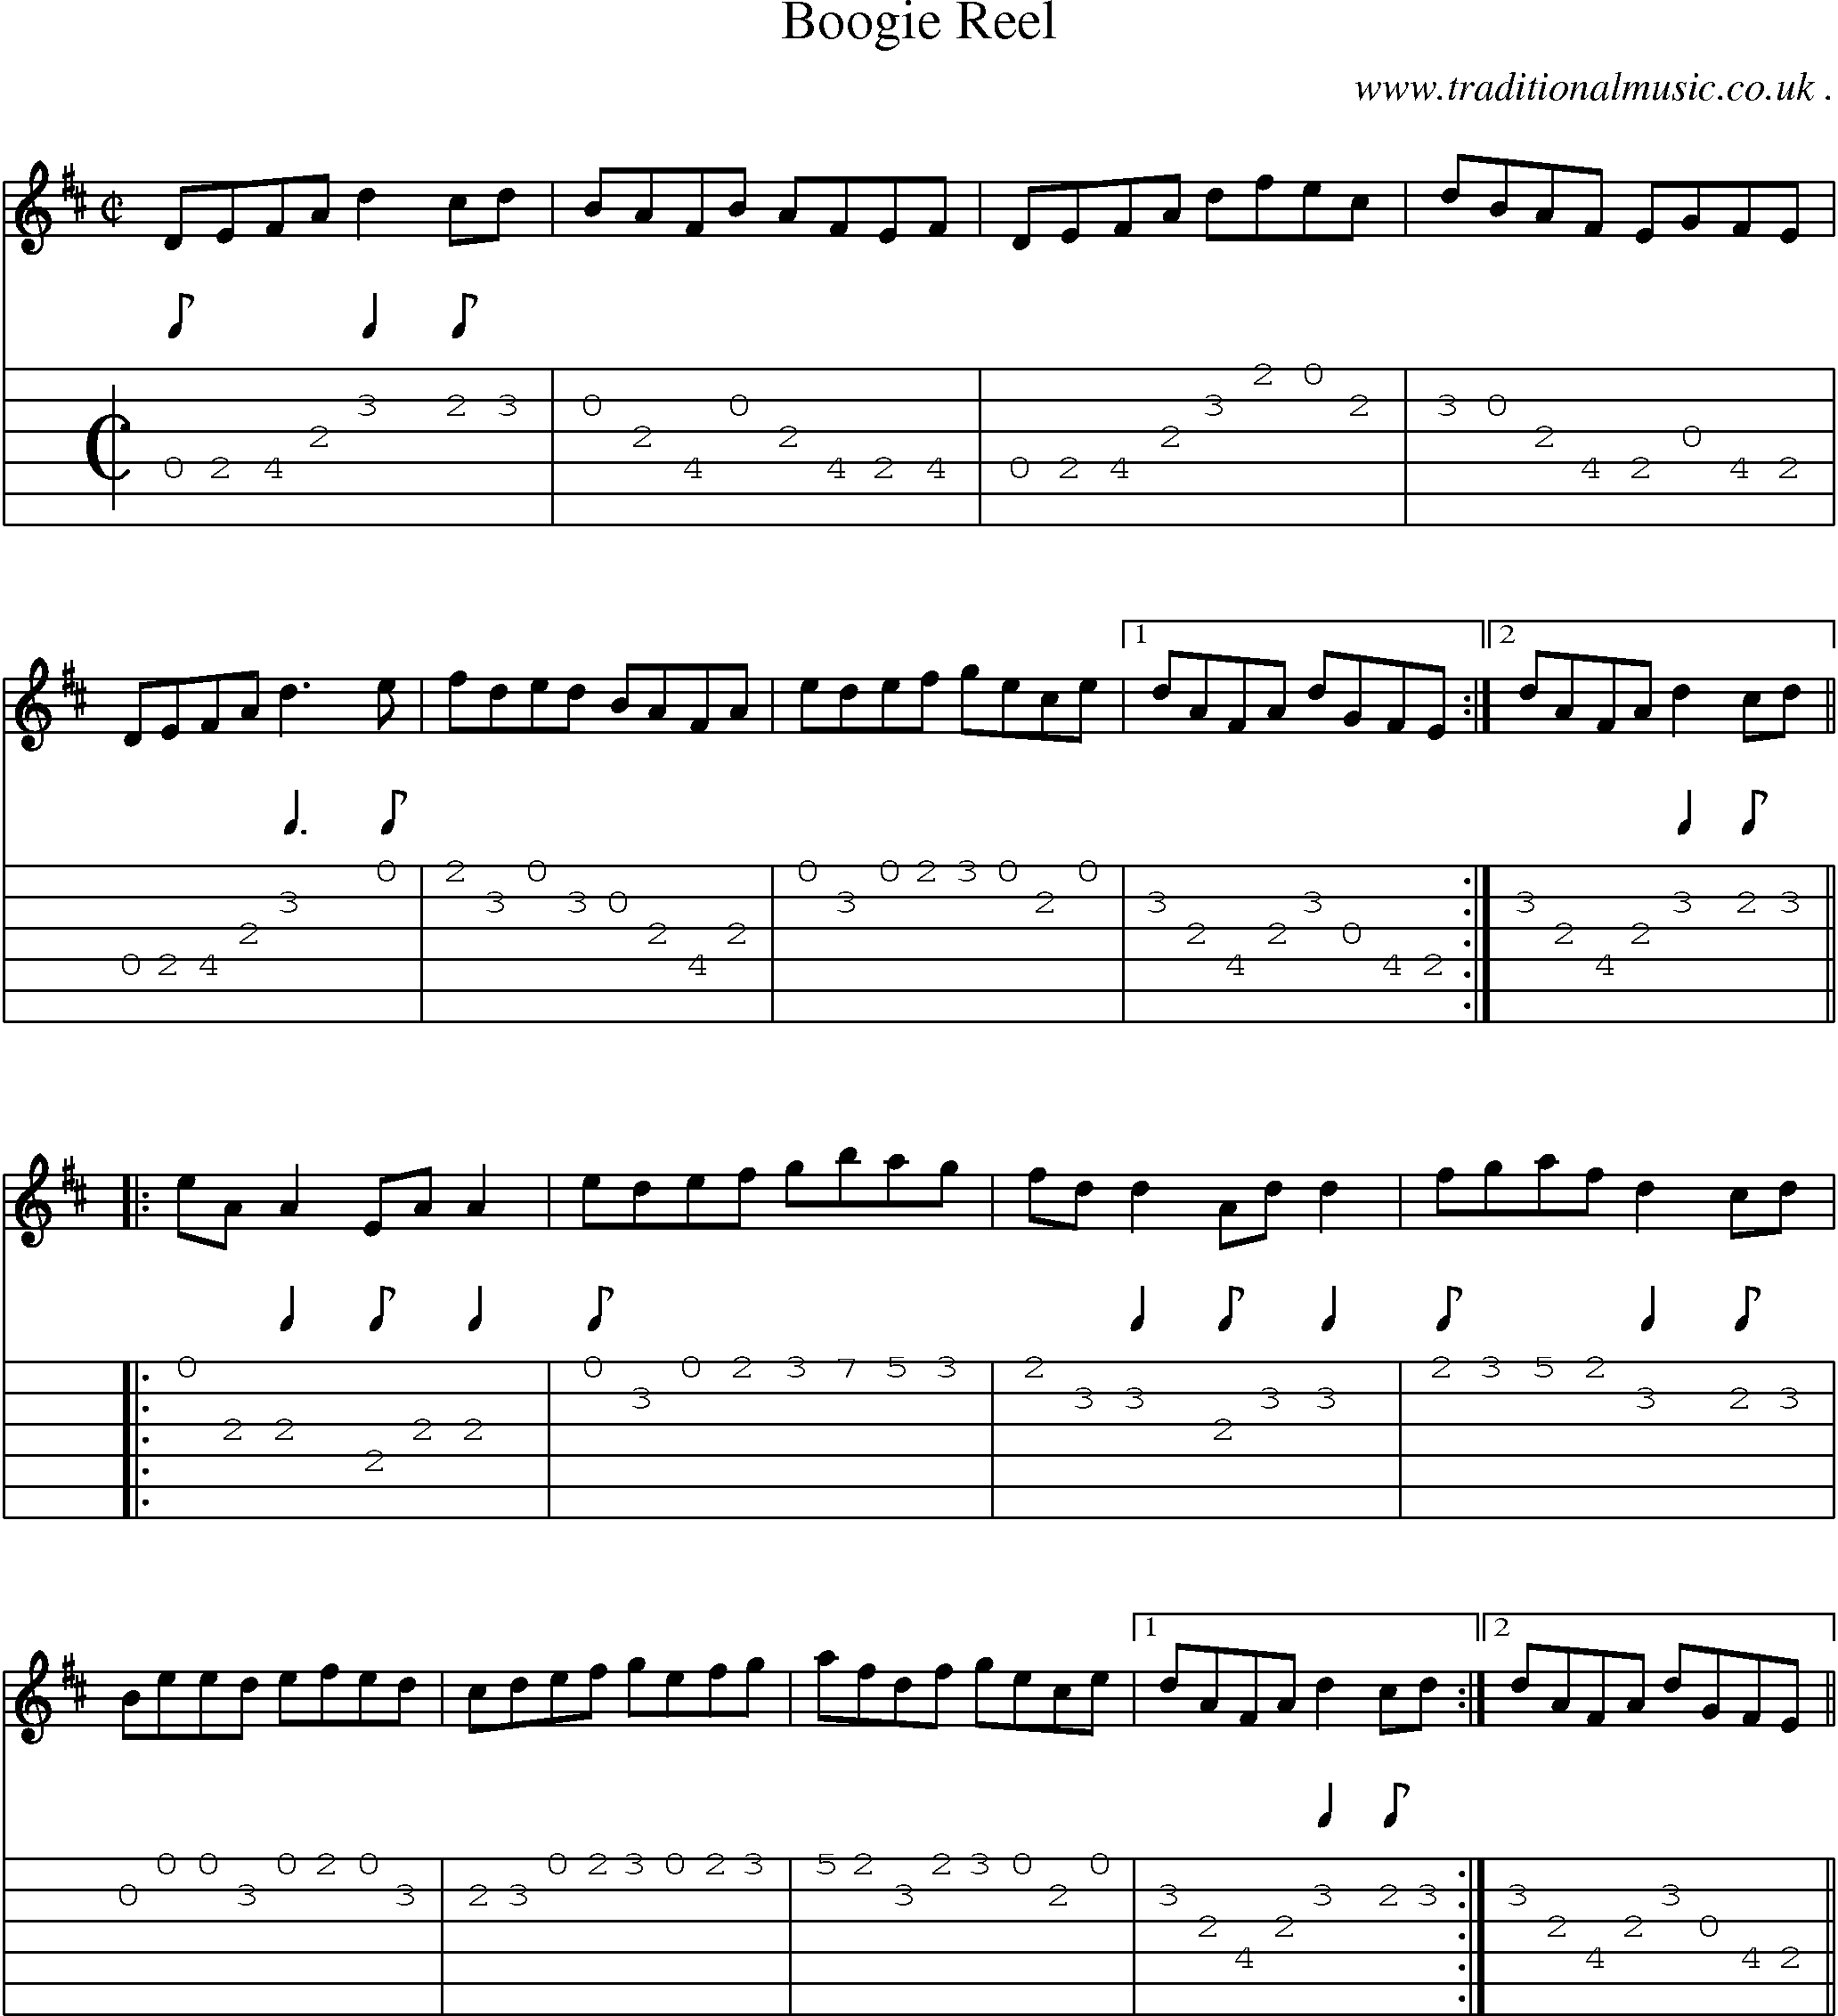 Sheet-Music and Guitar Tabs for Boogie Reel